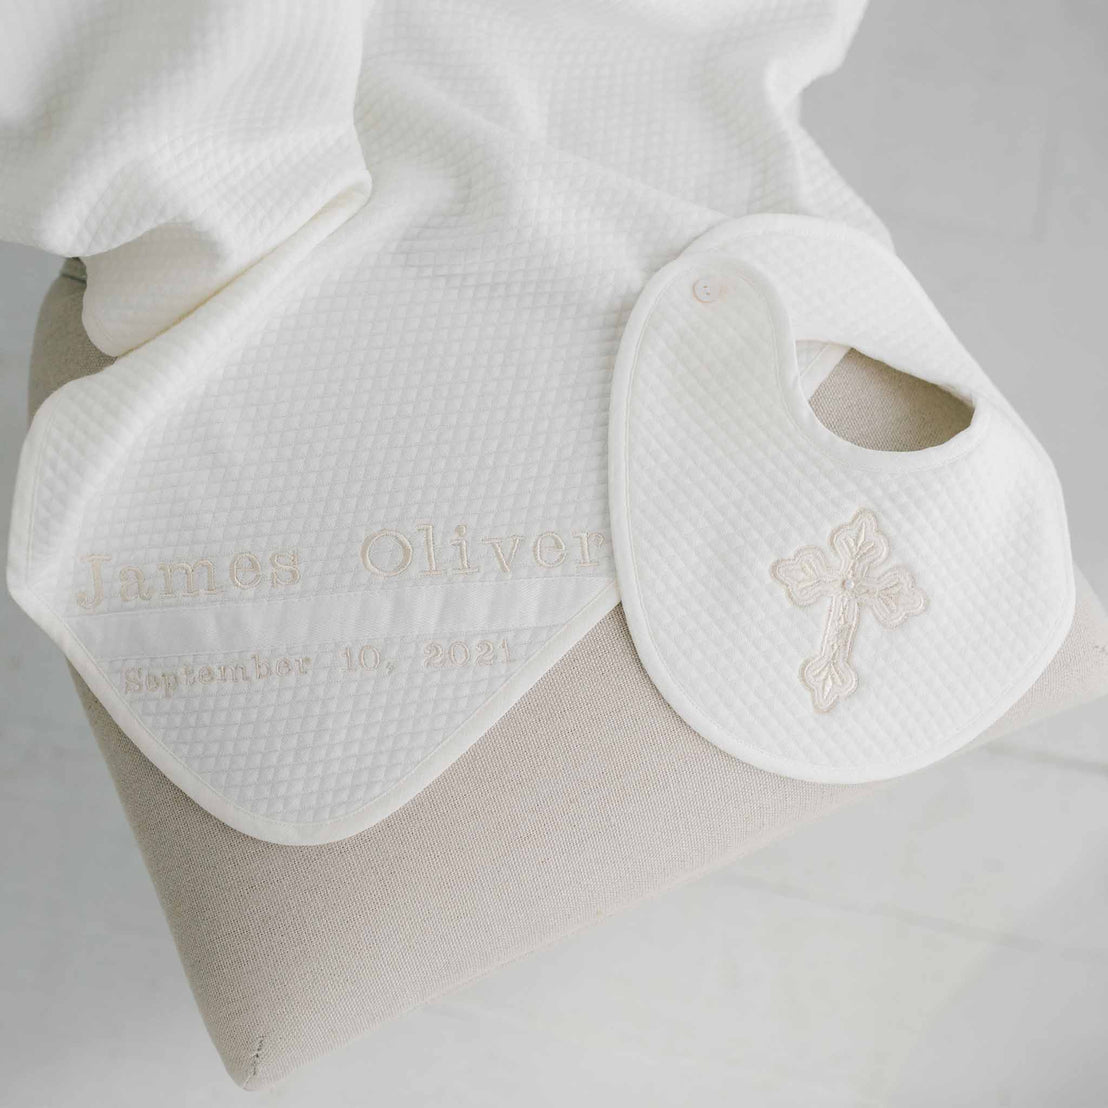 A personalized white Baby Boy Blessing Gift Set bib from Baby Beau & Belle with the name "james oliver" embroidered in light brown thread, alongside a date "10/2021" and a small floral design, resting on a quilted.